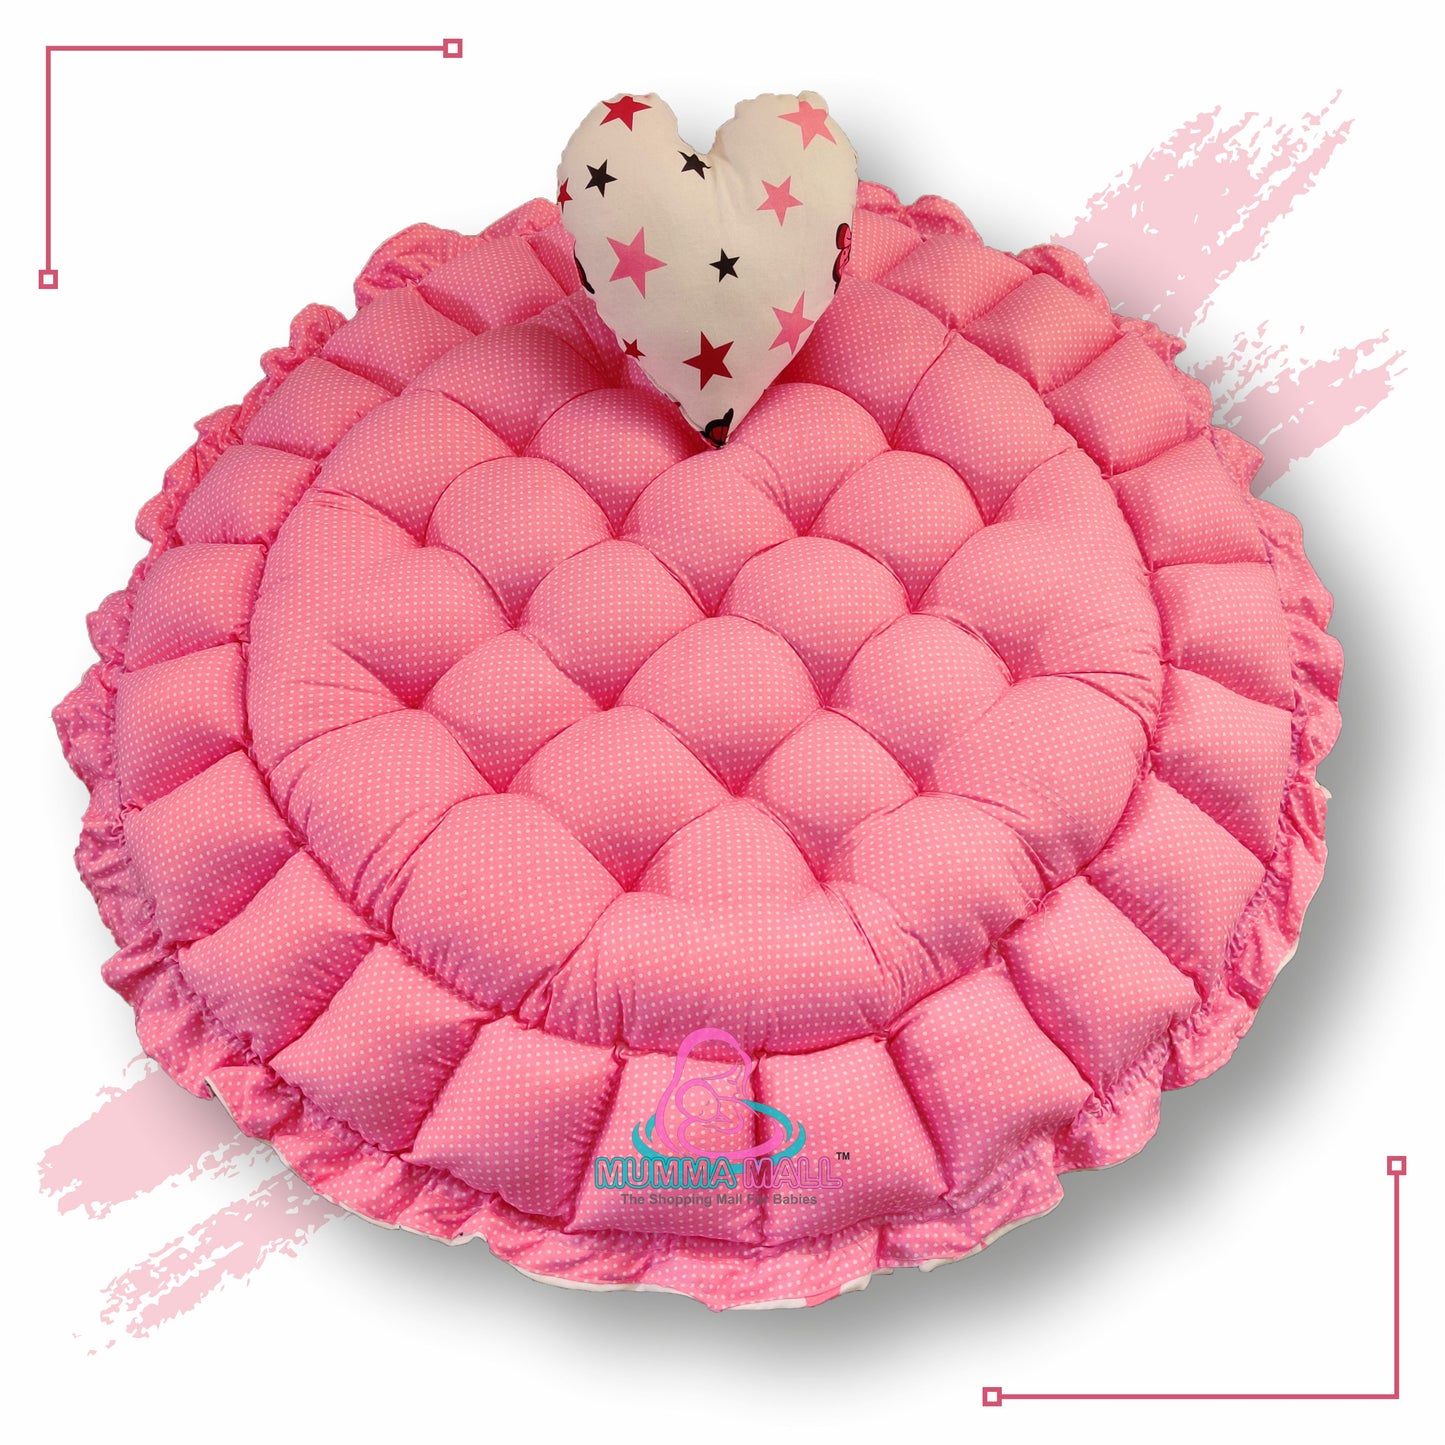 Round baby tub bed with a heart pillow (Pink and White)